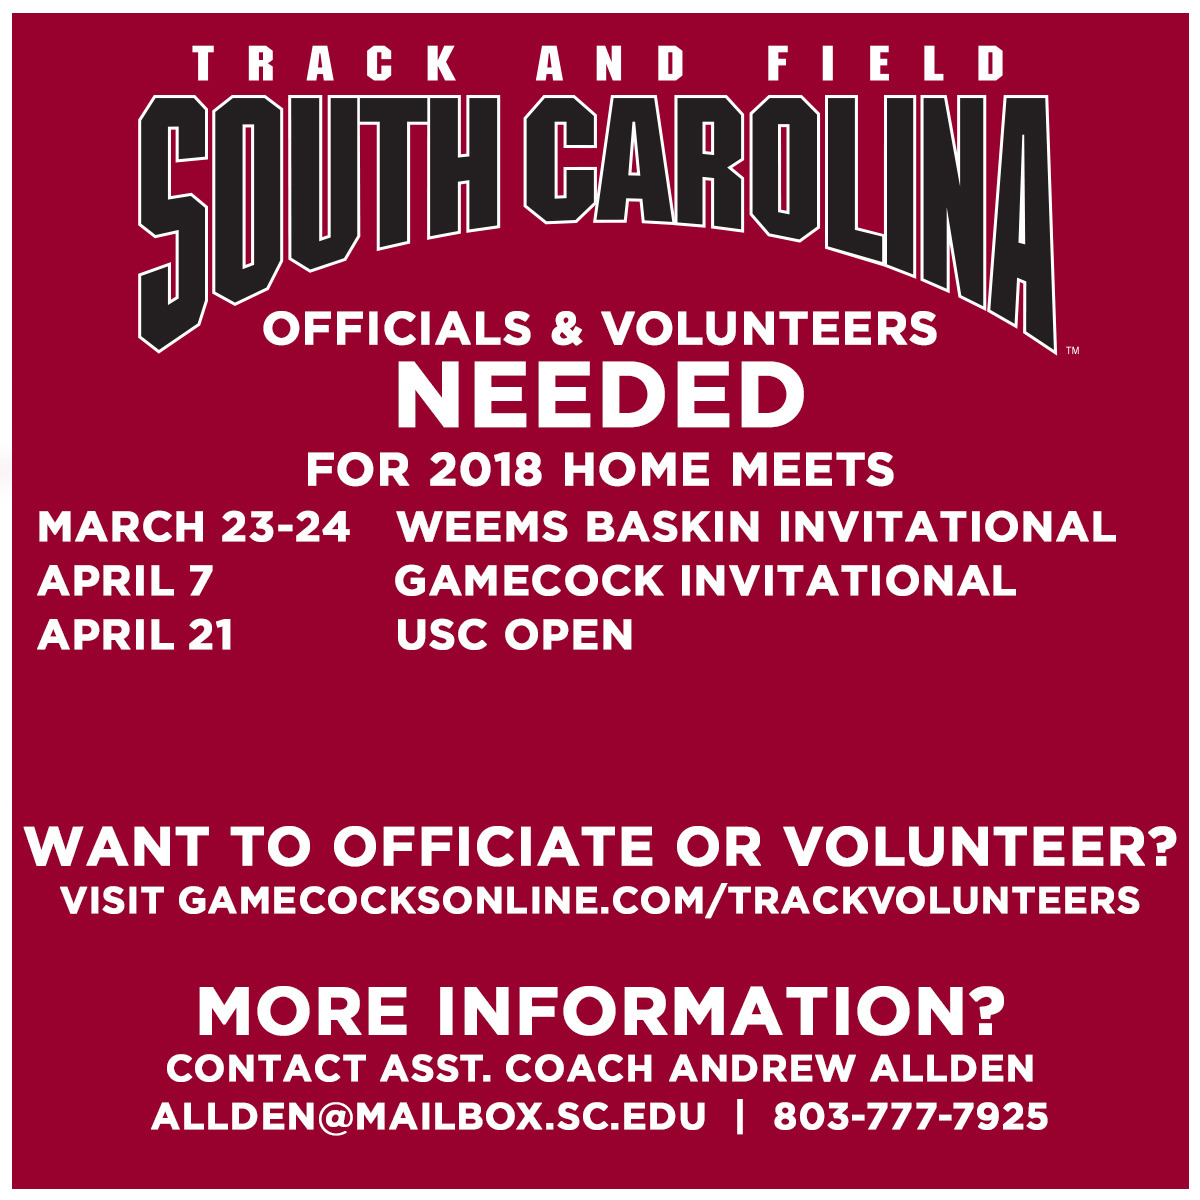 Officials and Volunteers Needed for Home Track & Field Meets